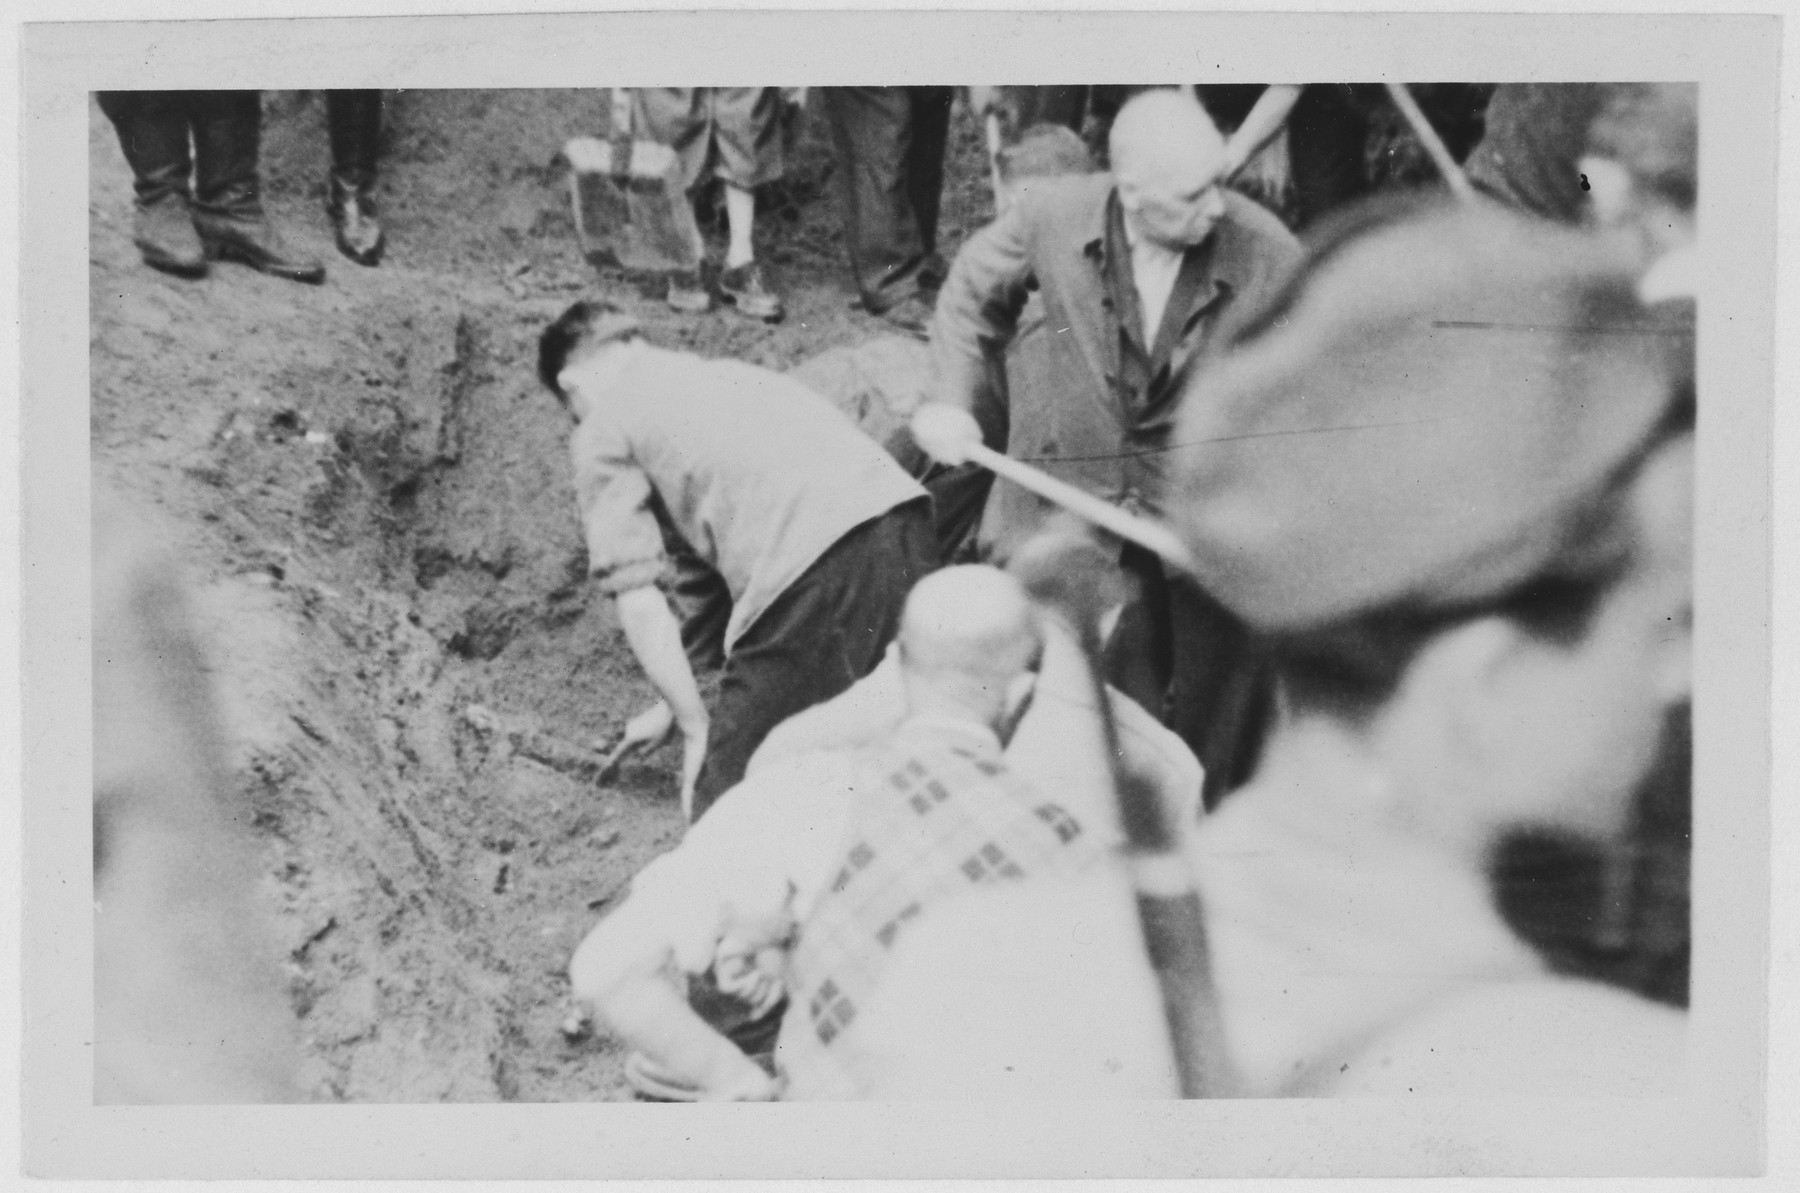 One of a series of photographs depicting the exhumation and reburial of Nazi victims in Pernink, Czechoslovakia.